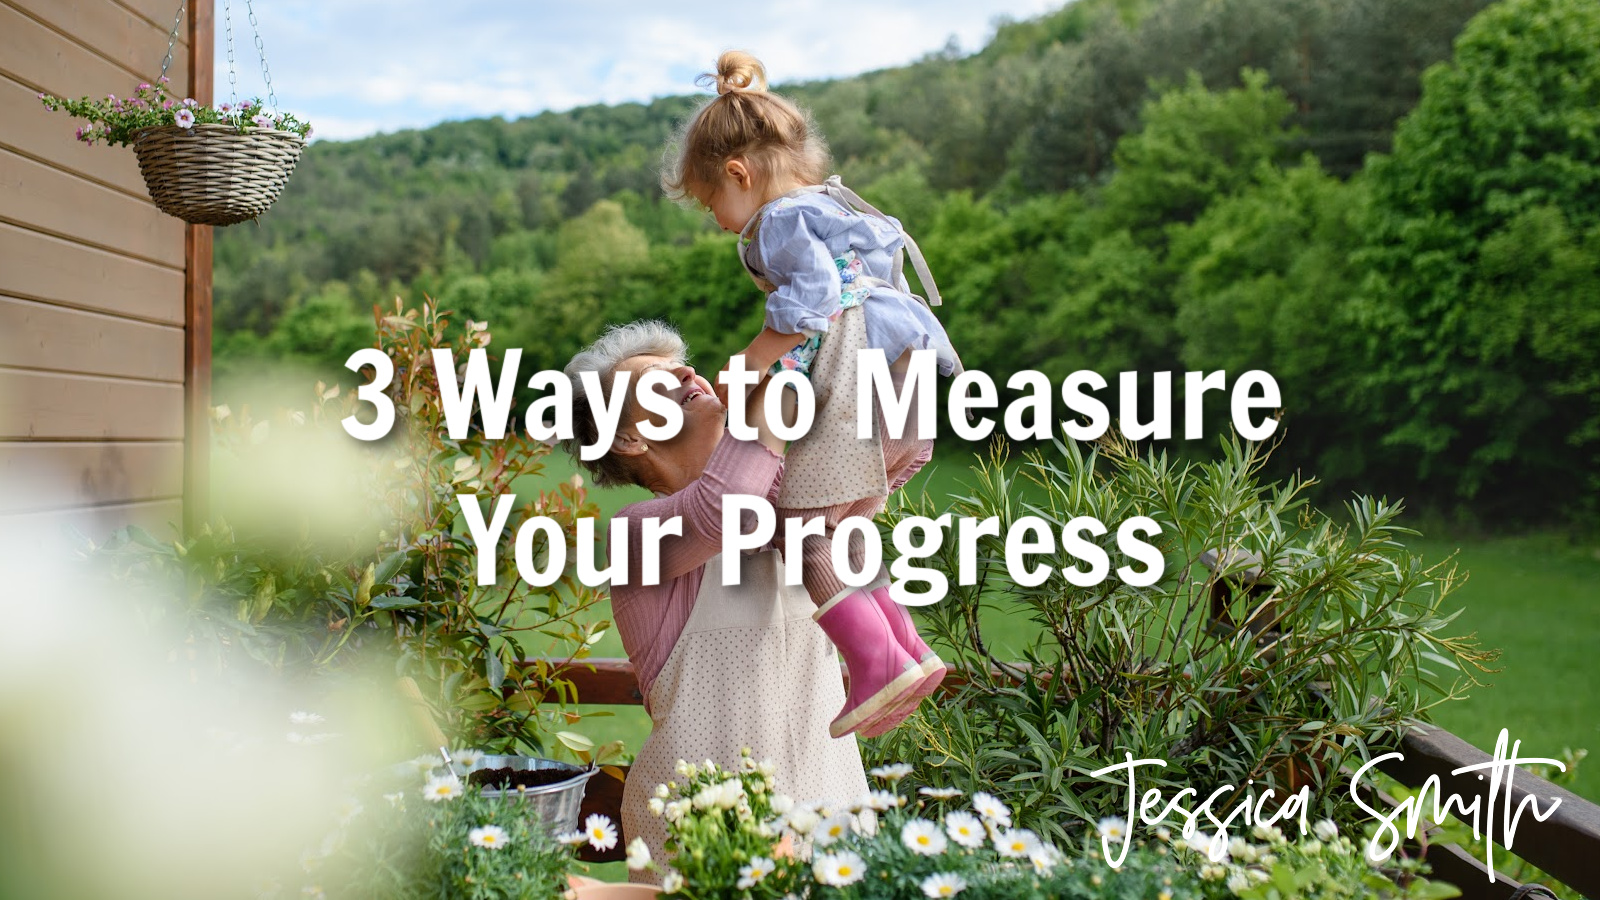 3 Ways to Measure Your Fitness Progress That Have Nothing to Do With the Scale